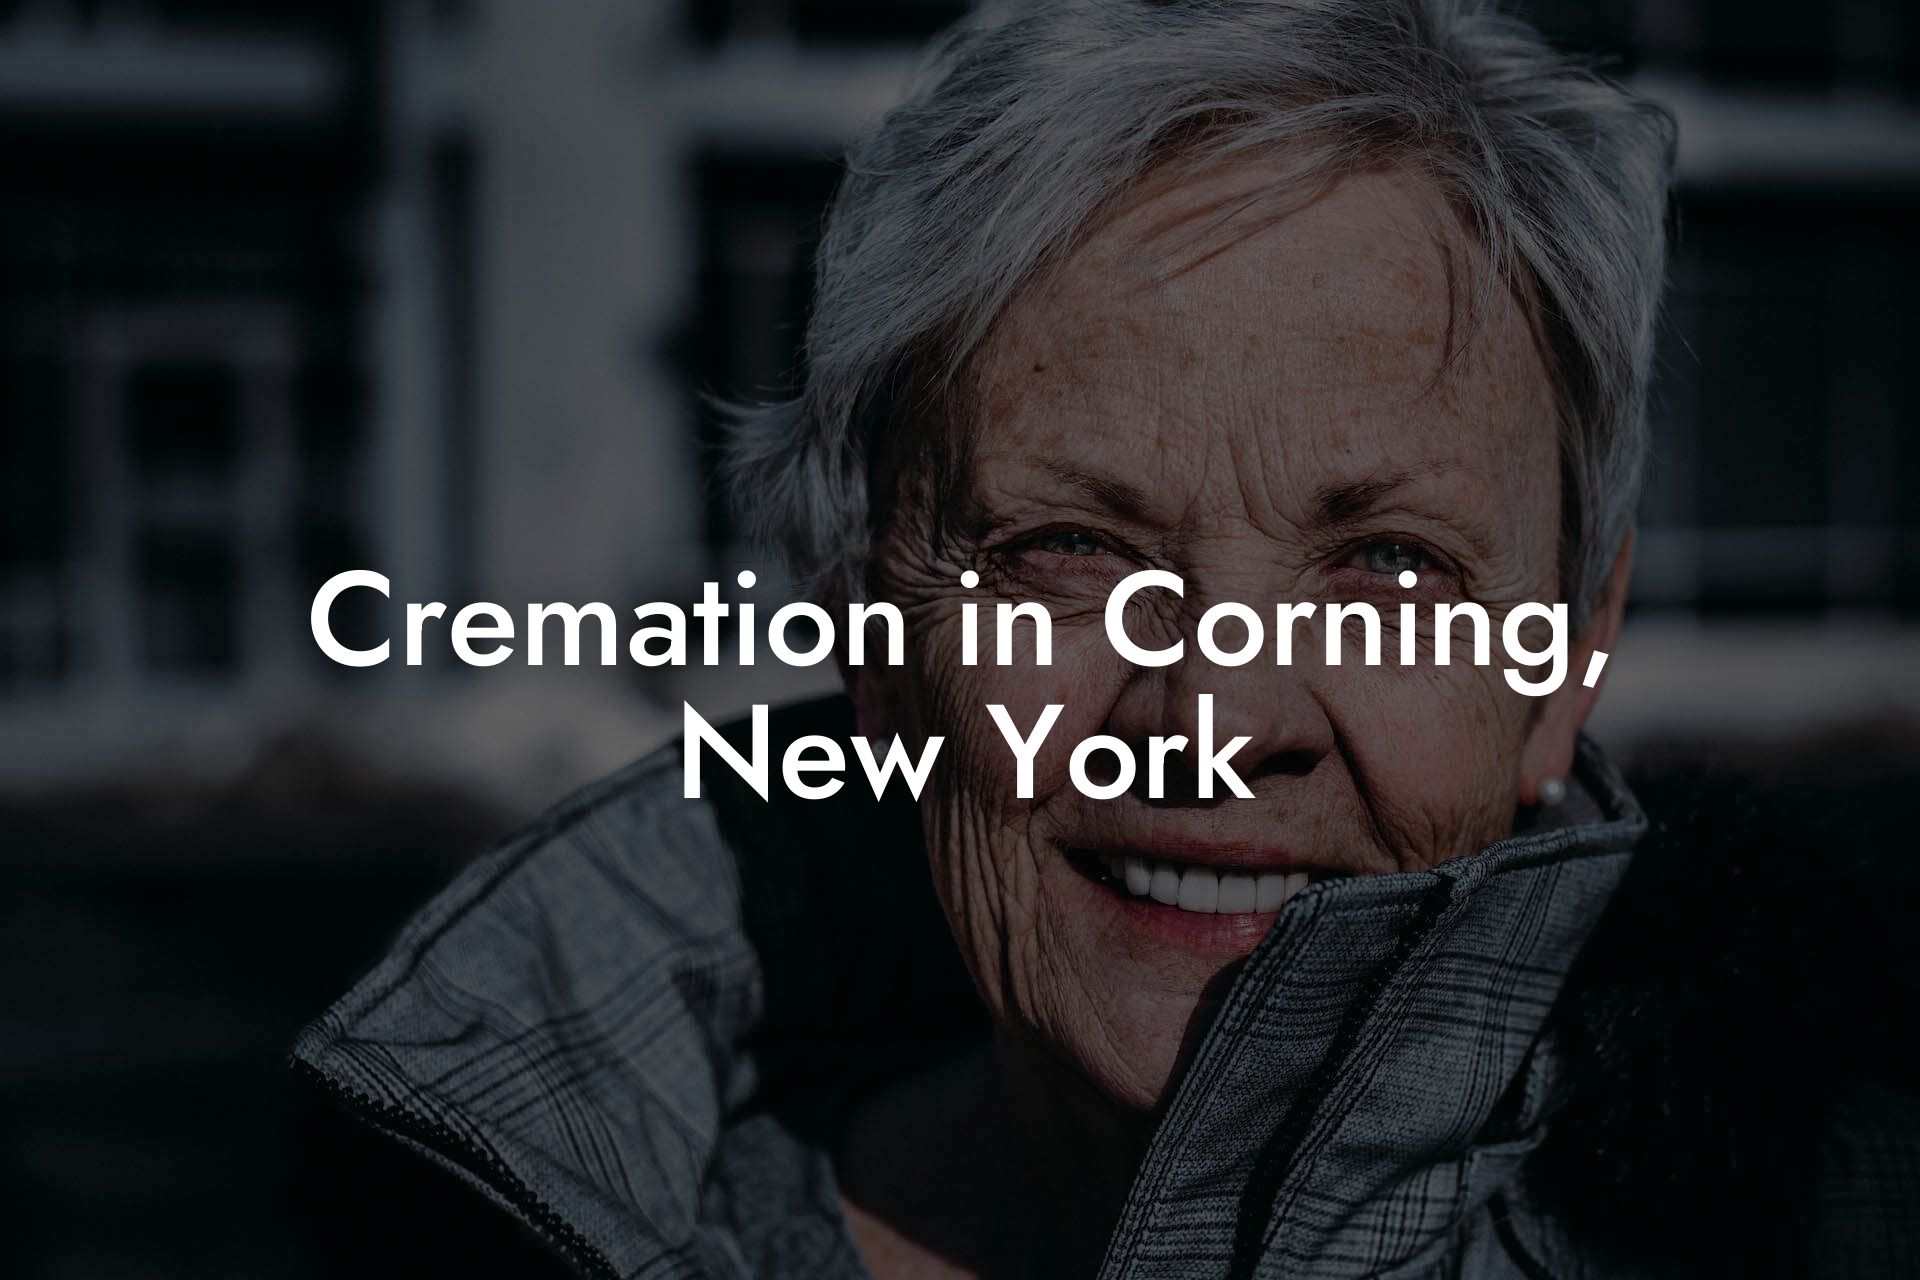 Cremation in Corning, New York